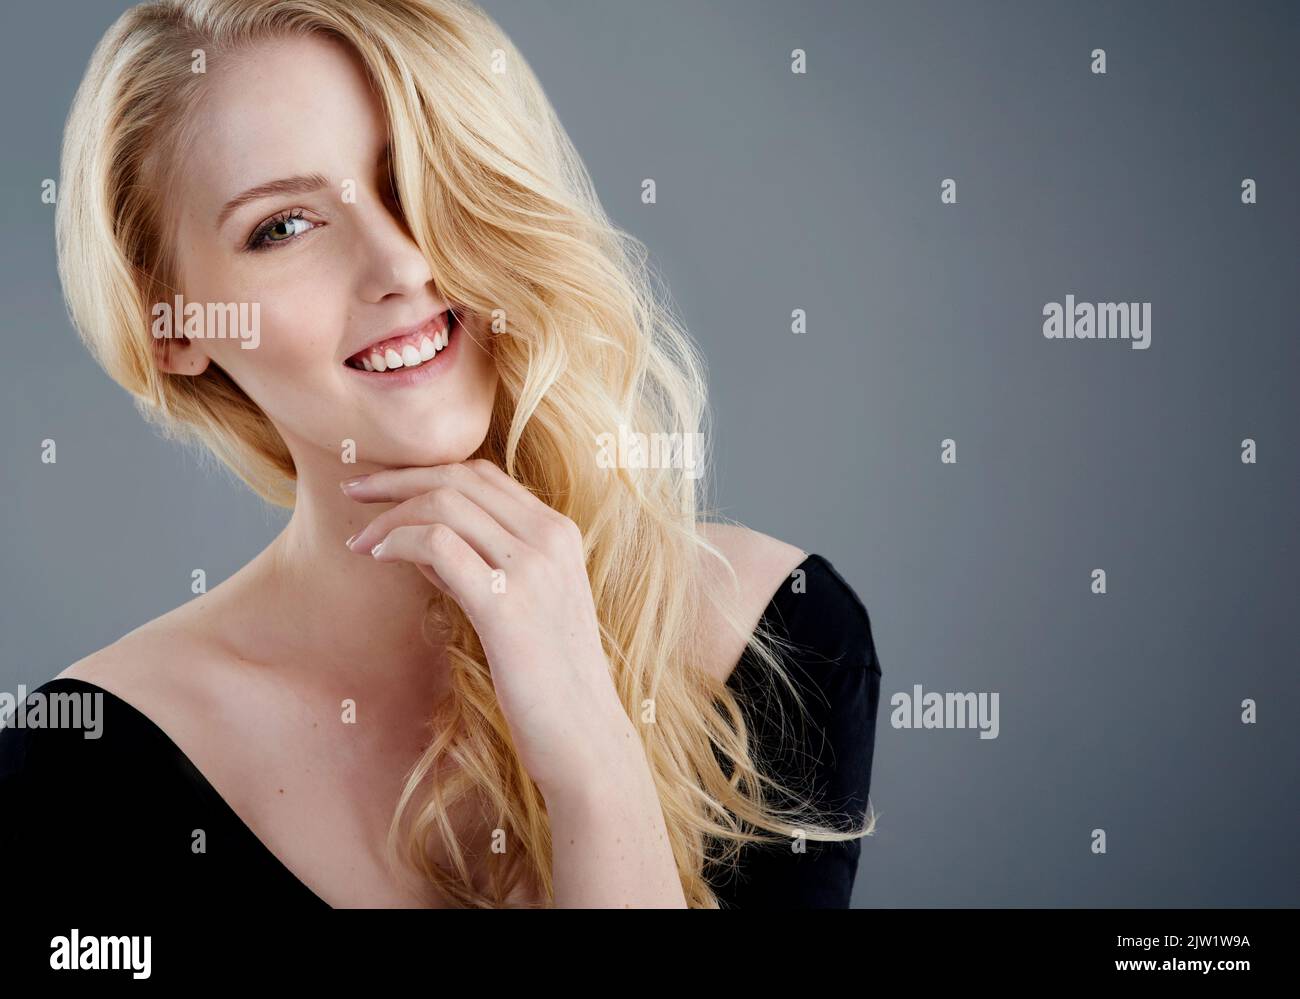 Gorgeous hair and a great smile. Studio portrait of an attractive young woman with beautiful long blonde hair posing against a gray background. Stock Photo